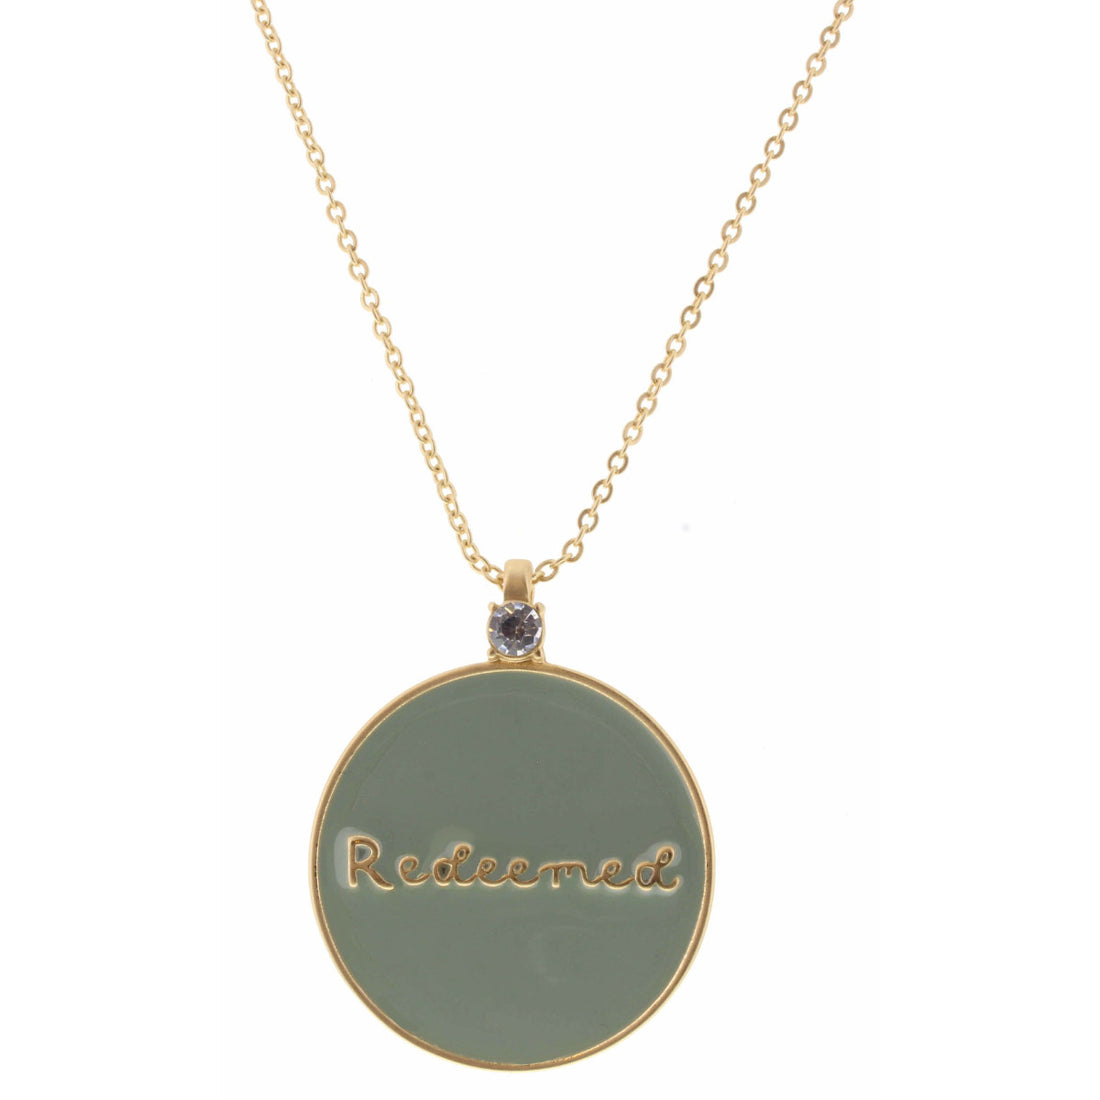 Redeemed Necklace